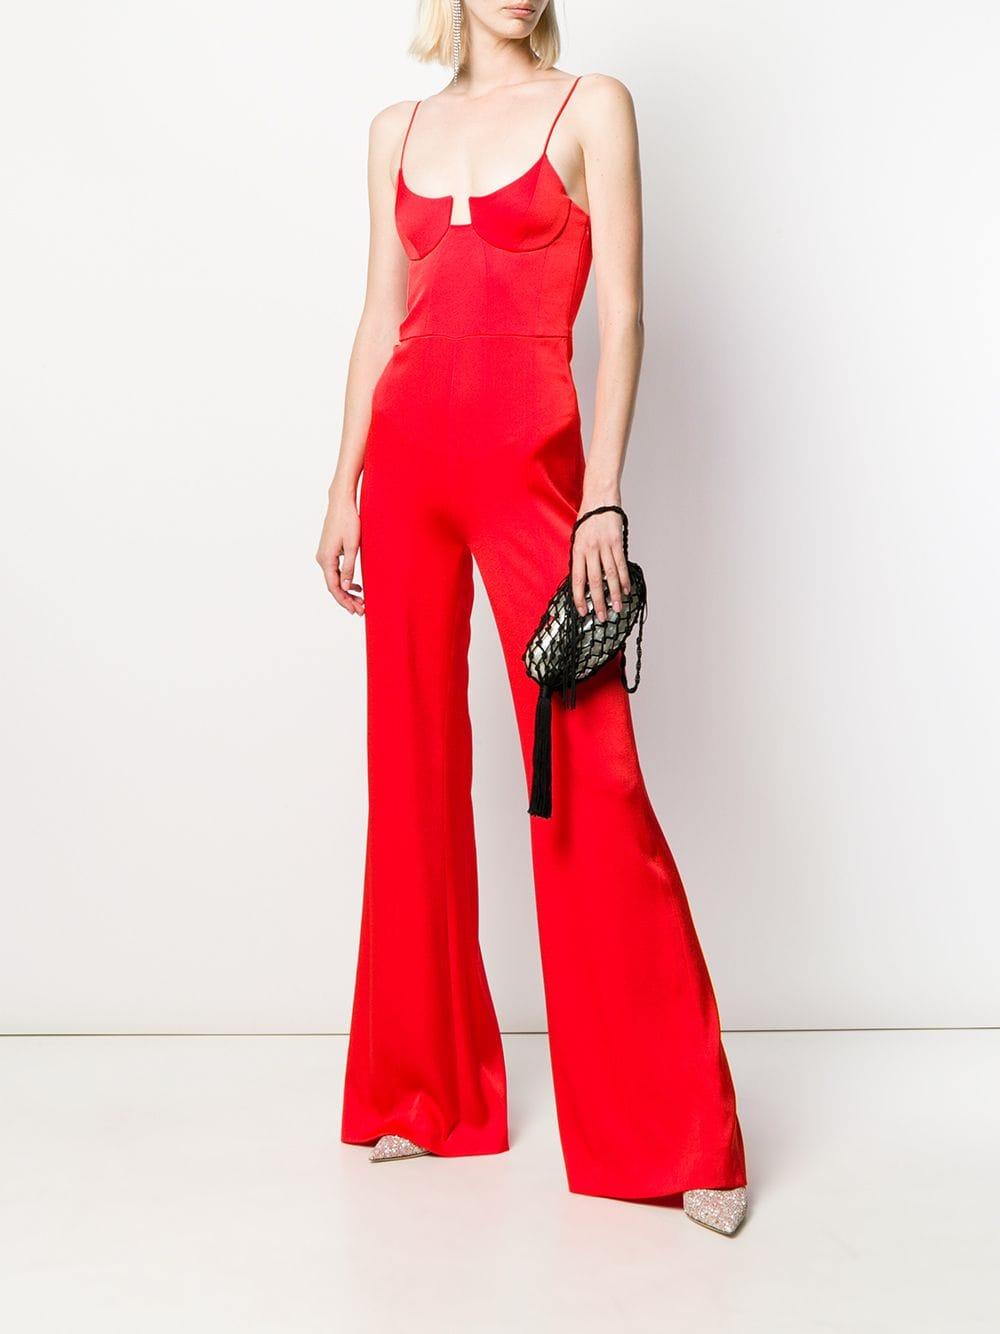 Galvan London Synthetic Phoebe Jumpsuit in Red - Lyst